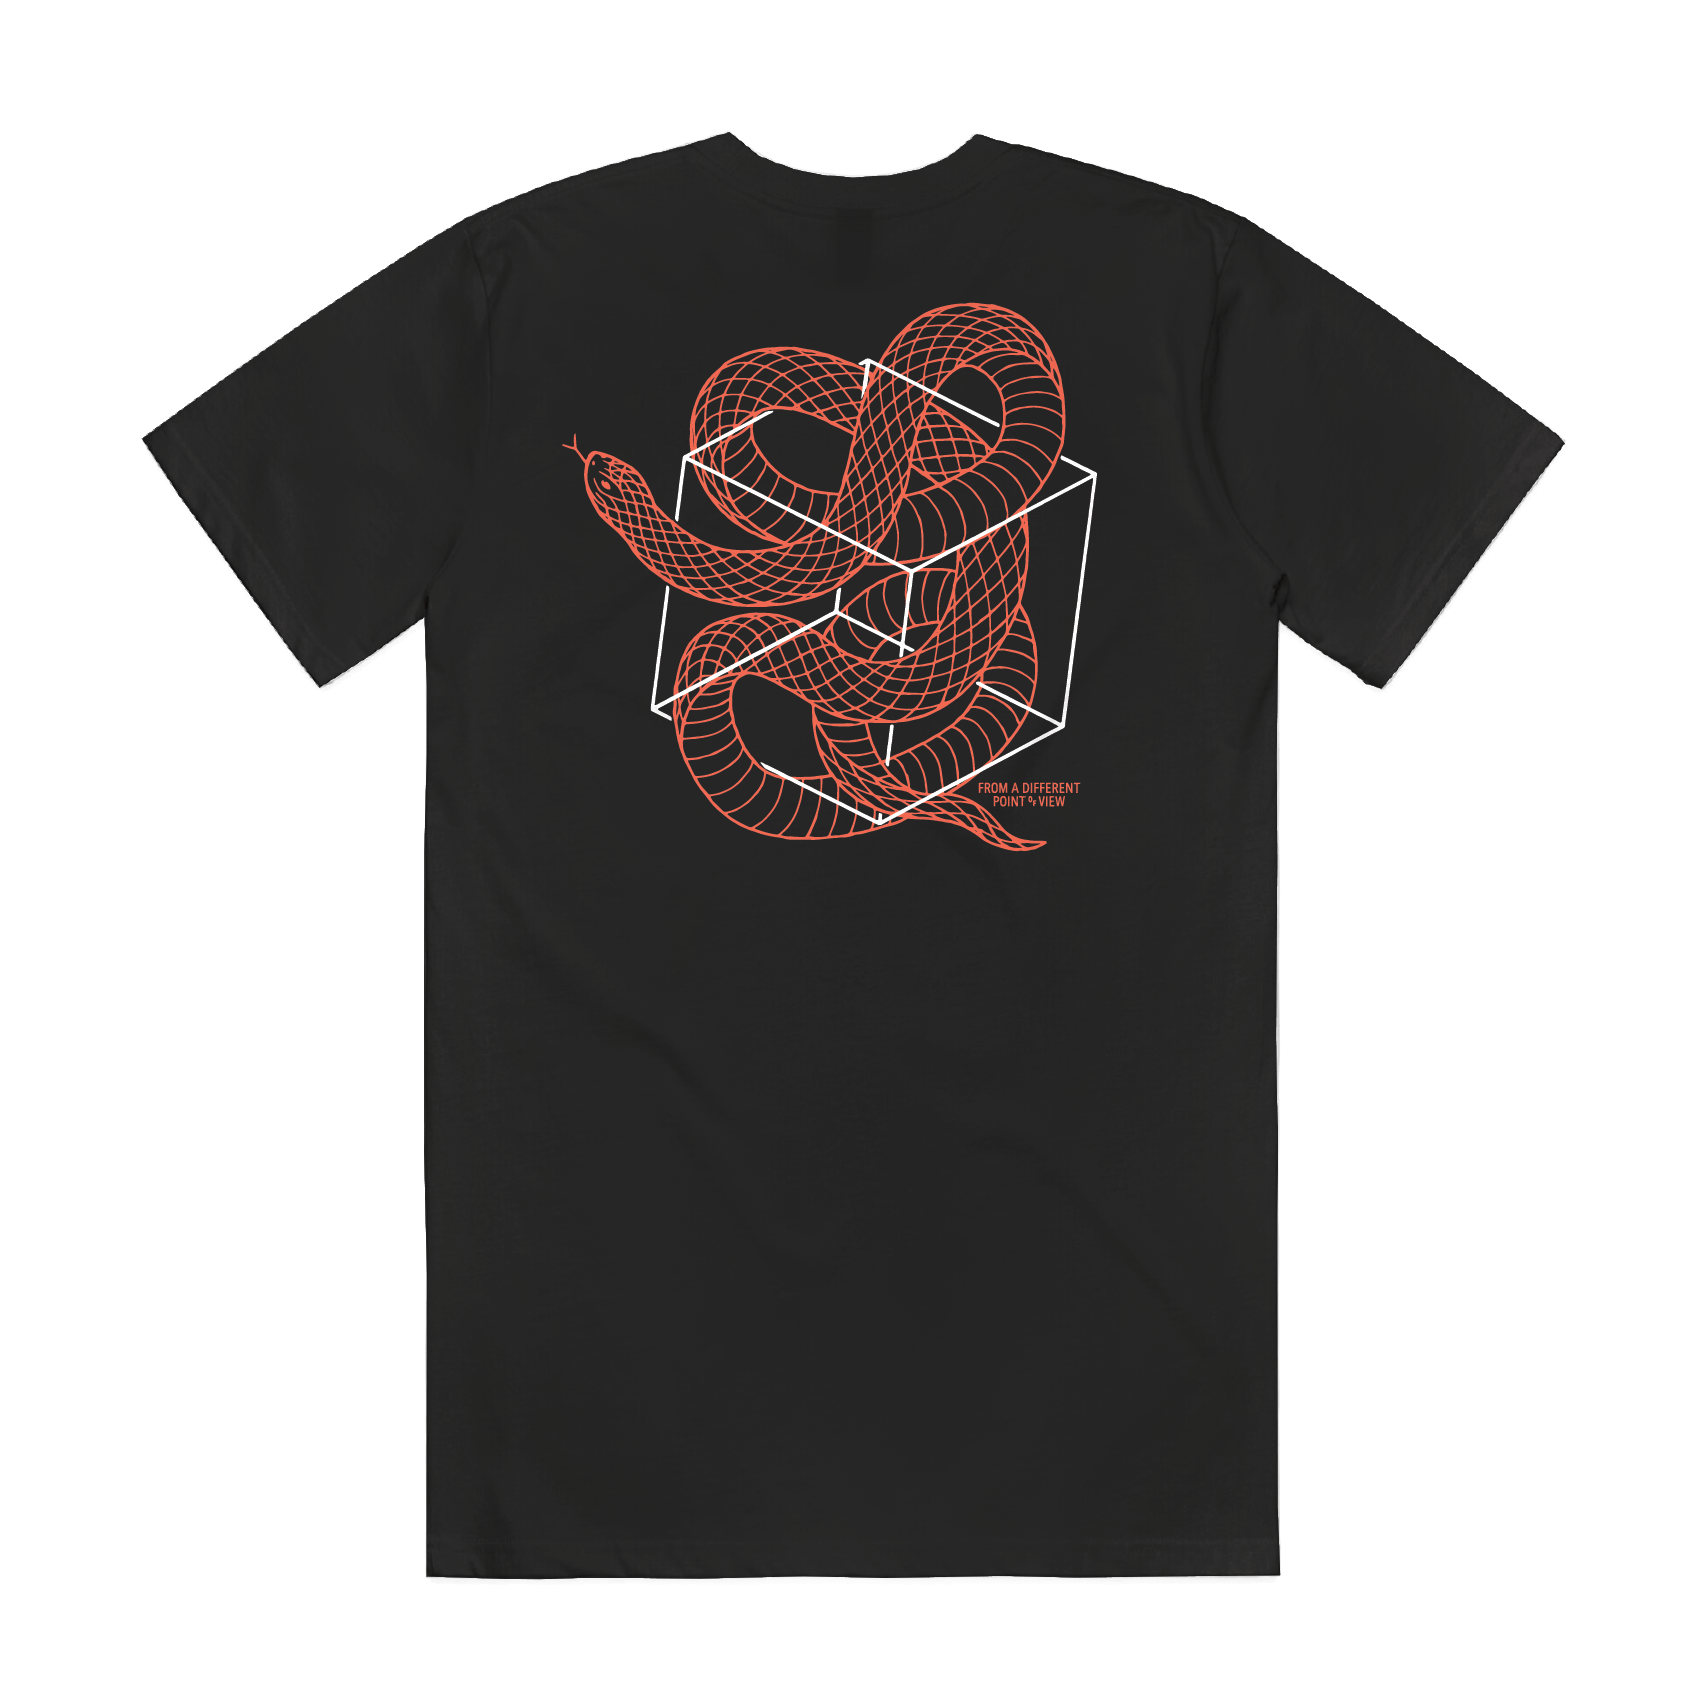 The Serpent Graphic T-Shirt